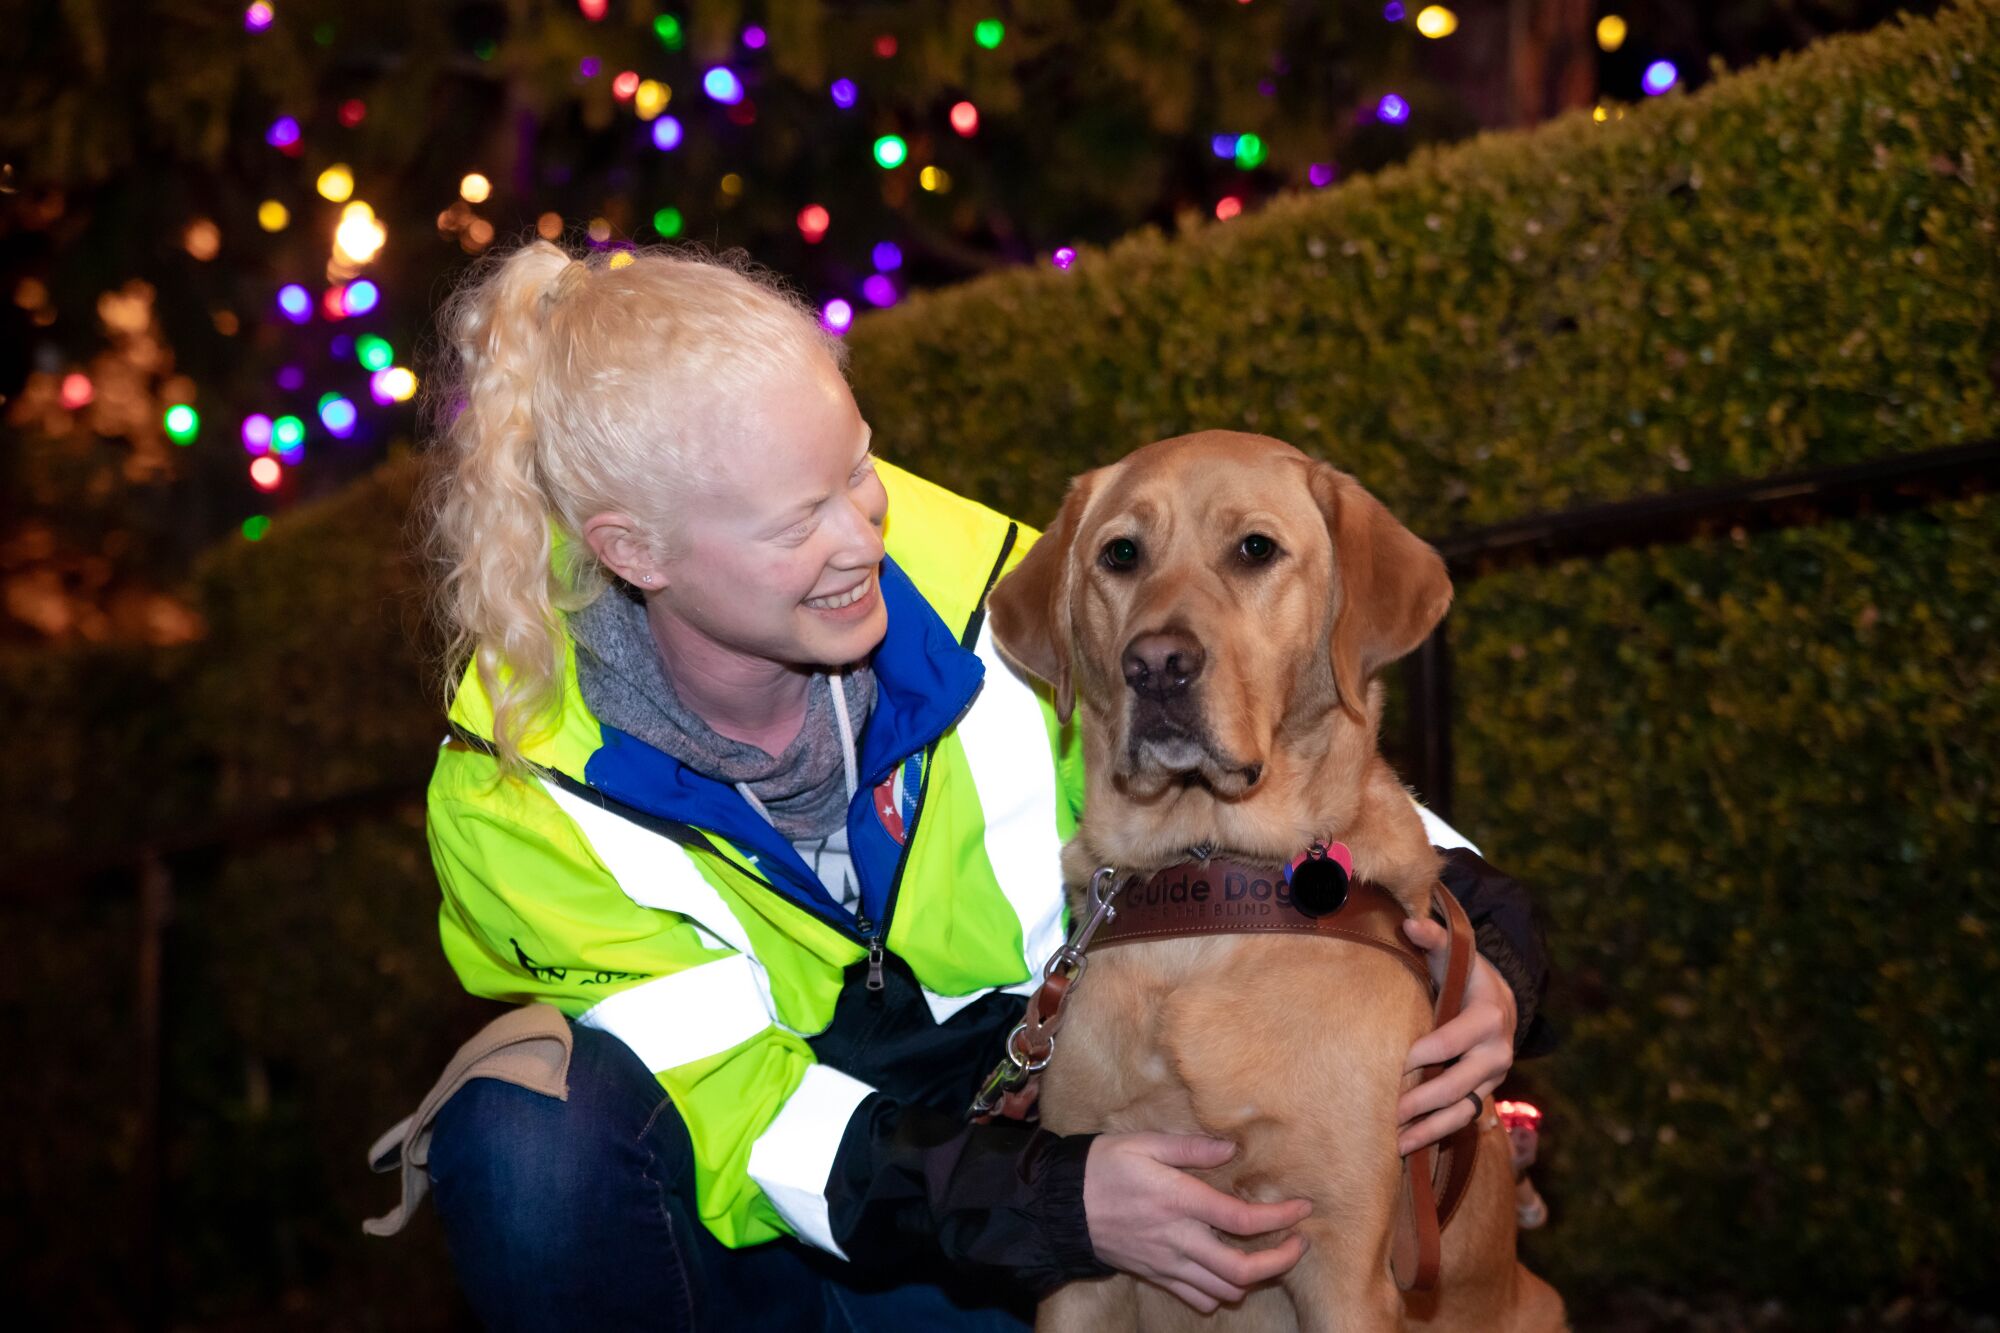 Kym Crosby and guide dog Tron pose in front of holiday lights.